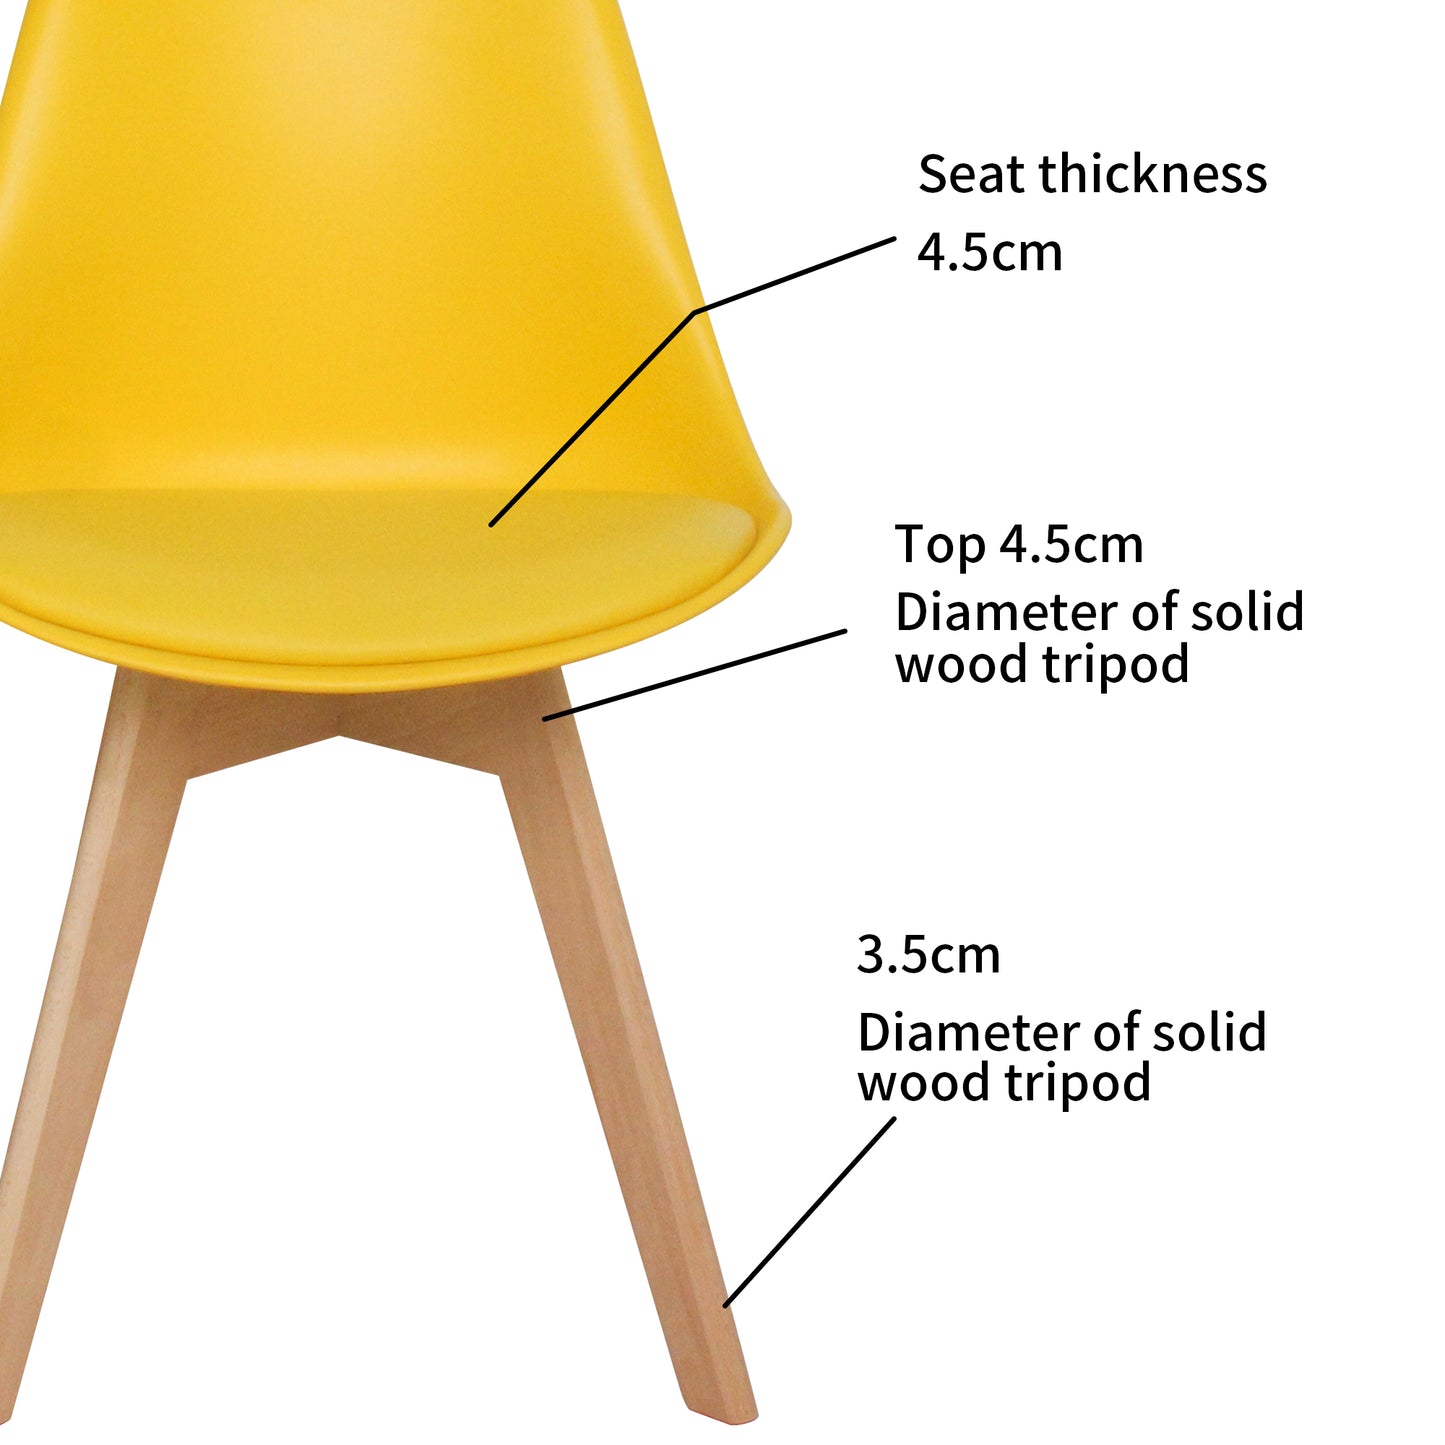 CHOTTO - Ando Dining Chairs - Yellow x 2